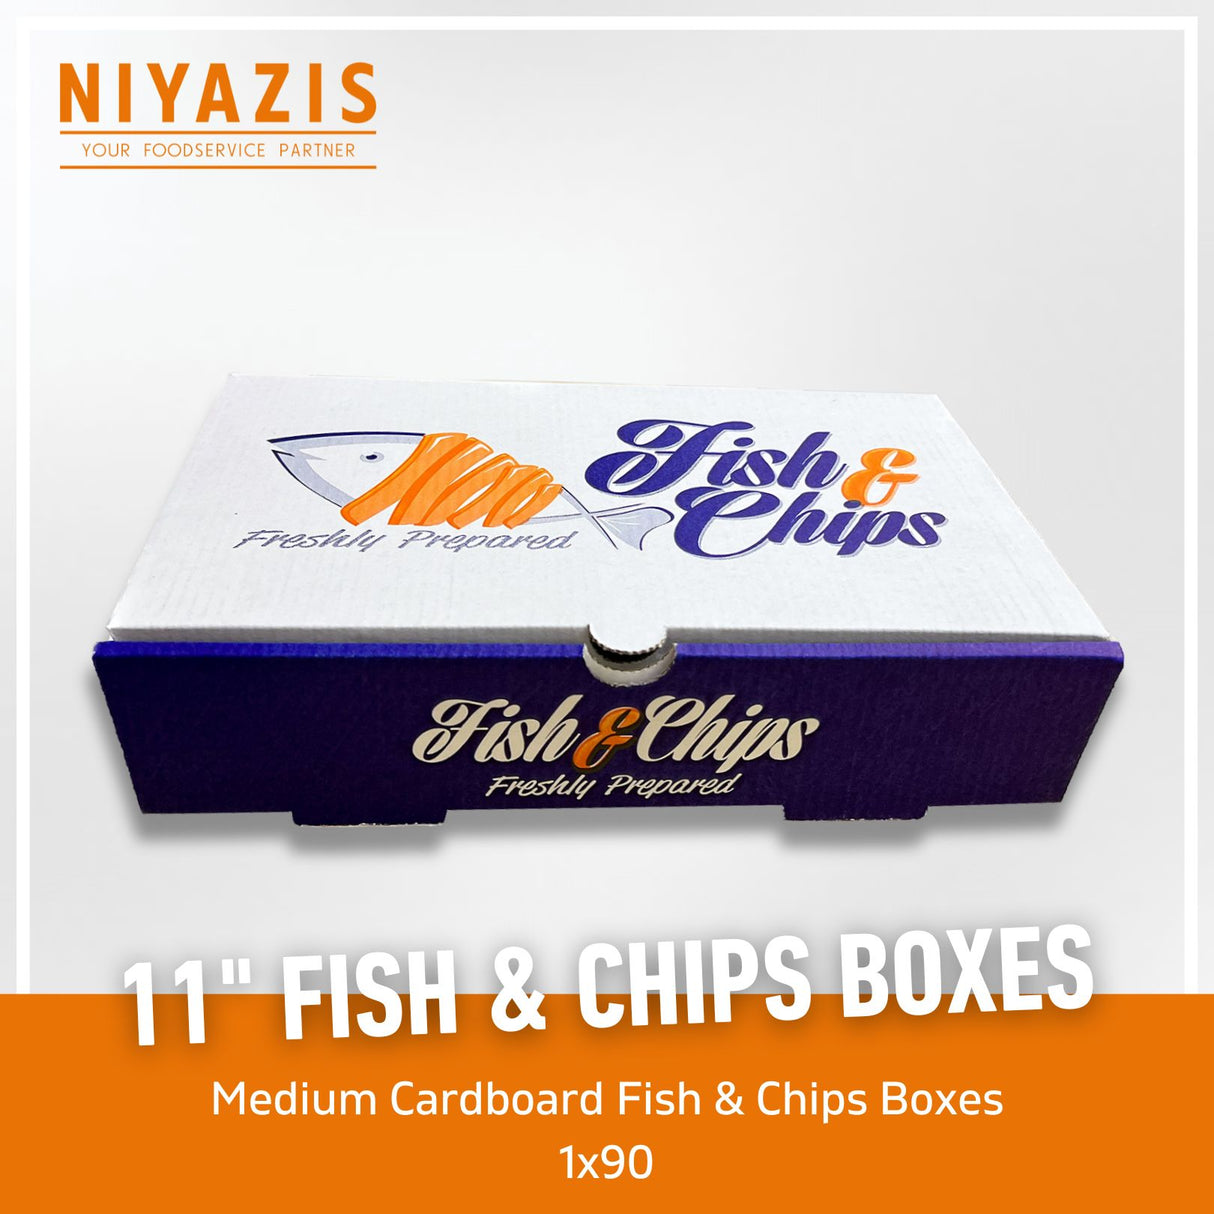 11" Cardboard Fish & Chips Boxes 1X90